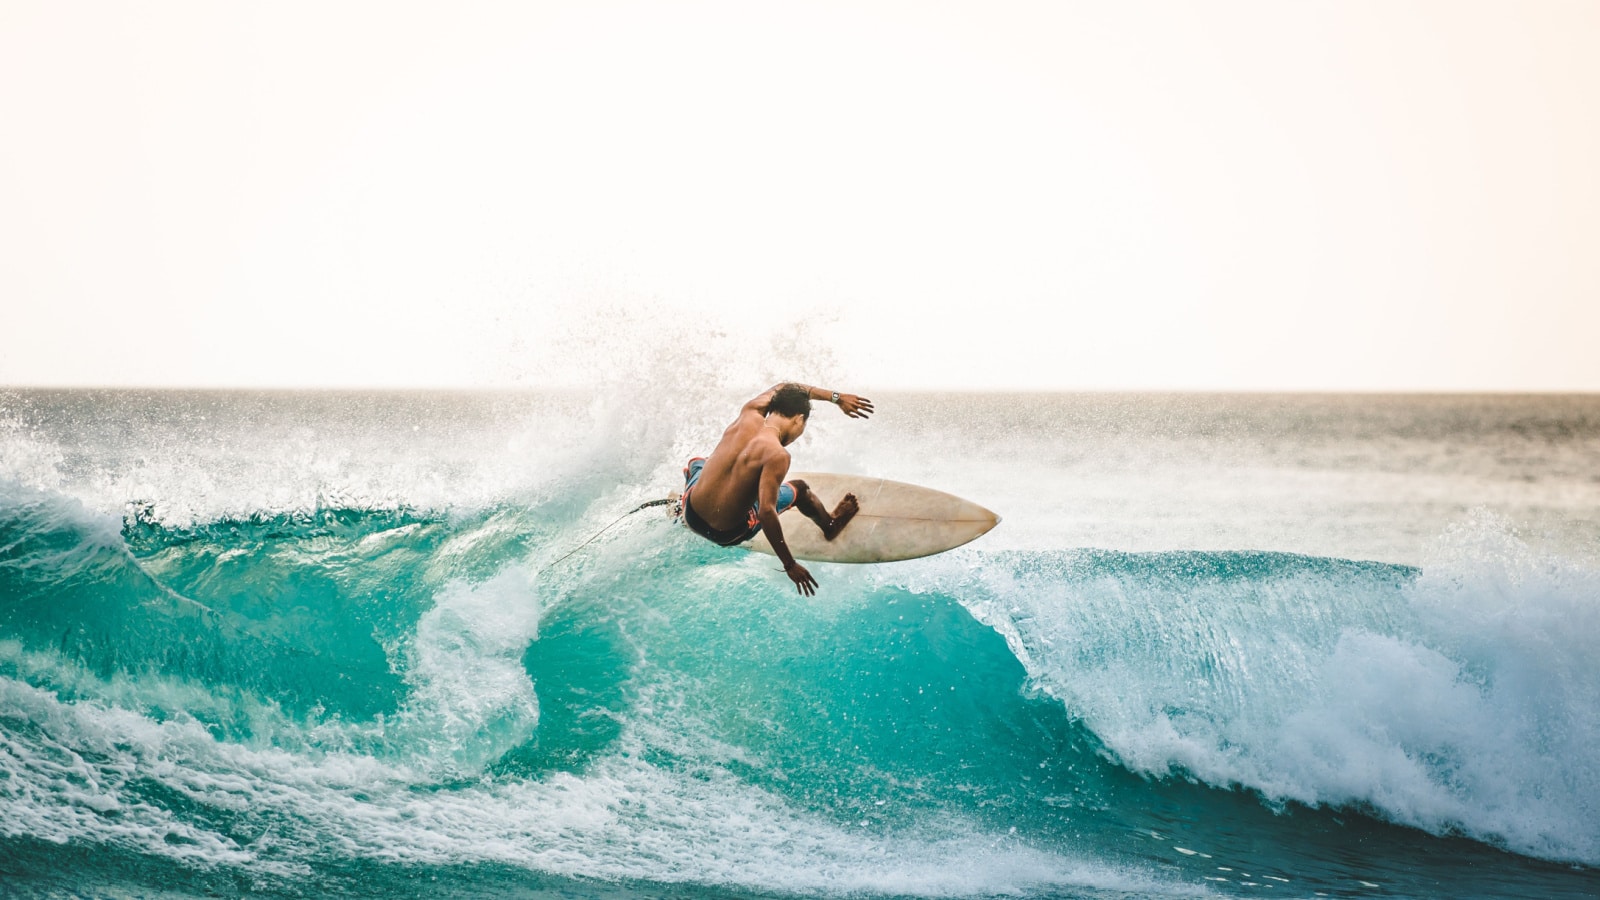 professional surfer riding waves in Bali, Indonesia. men catching waves in ocean, isolated. Surfing action water board sport. people water sport lessons and beach swimming activity on summer vacation